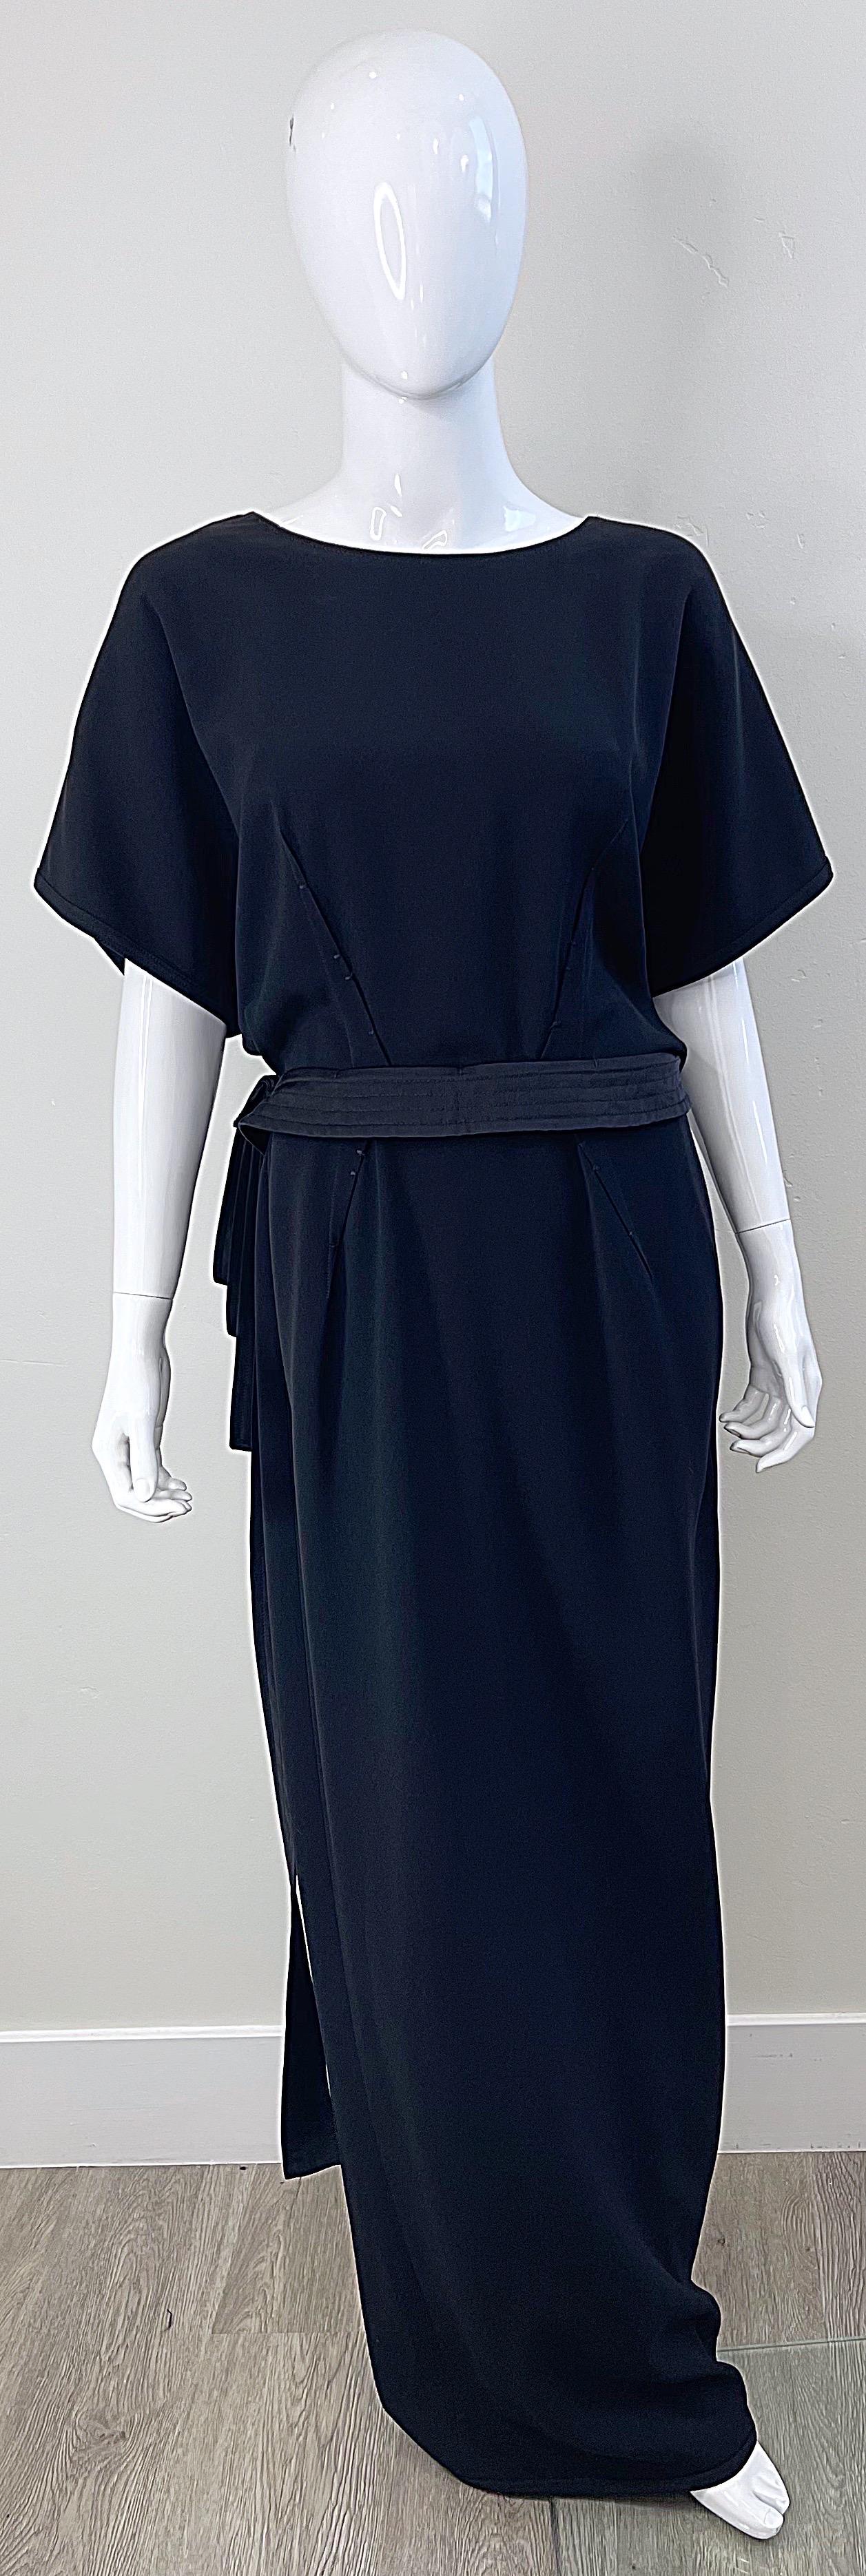 Elegant early 2000s new with original store tags vintage Y2K GIANFRANCO FERRE black rayon wrap gown ! Features a generous bodice with dolman sleeves. The dress can actually be worn backwards as well. Simply slips over the head, and buttons at the